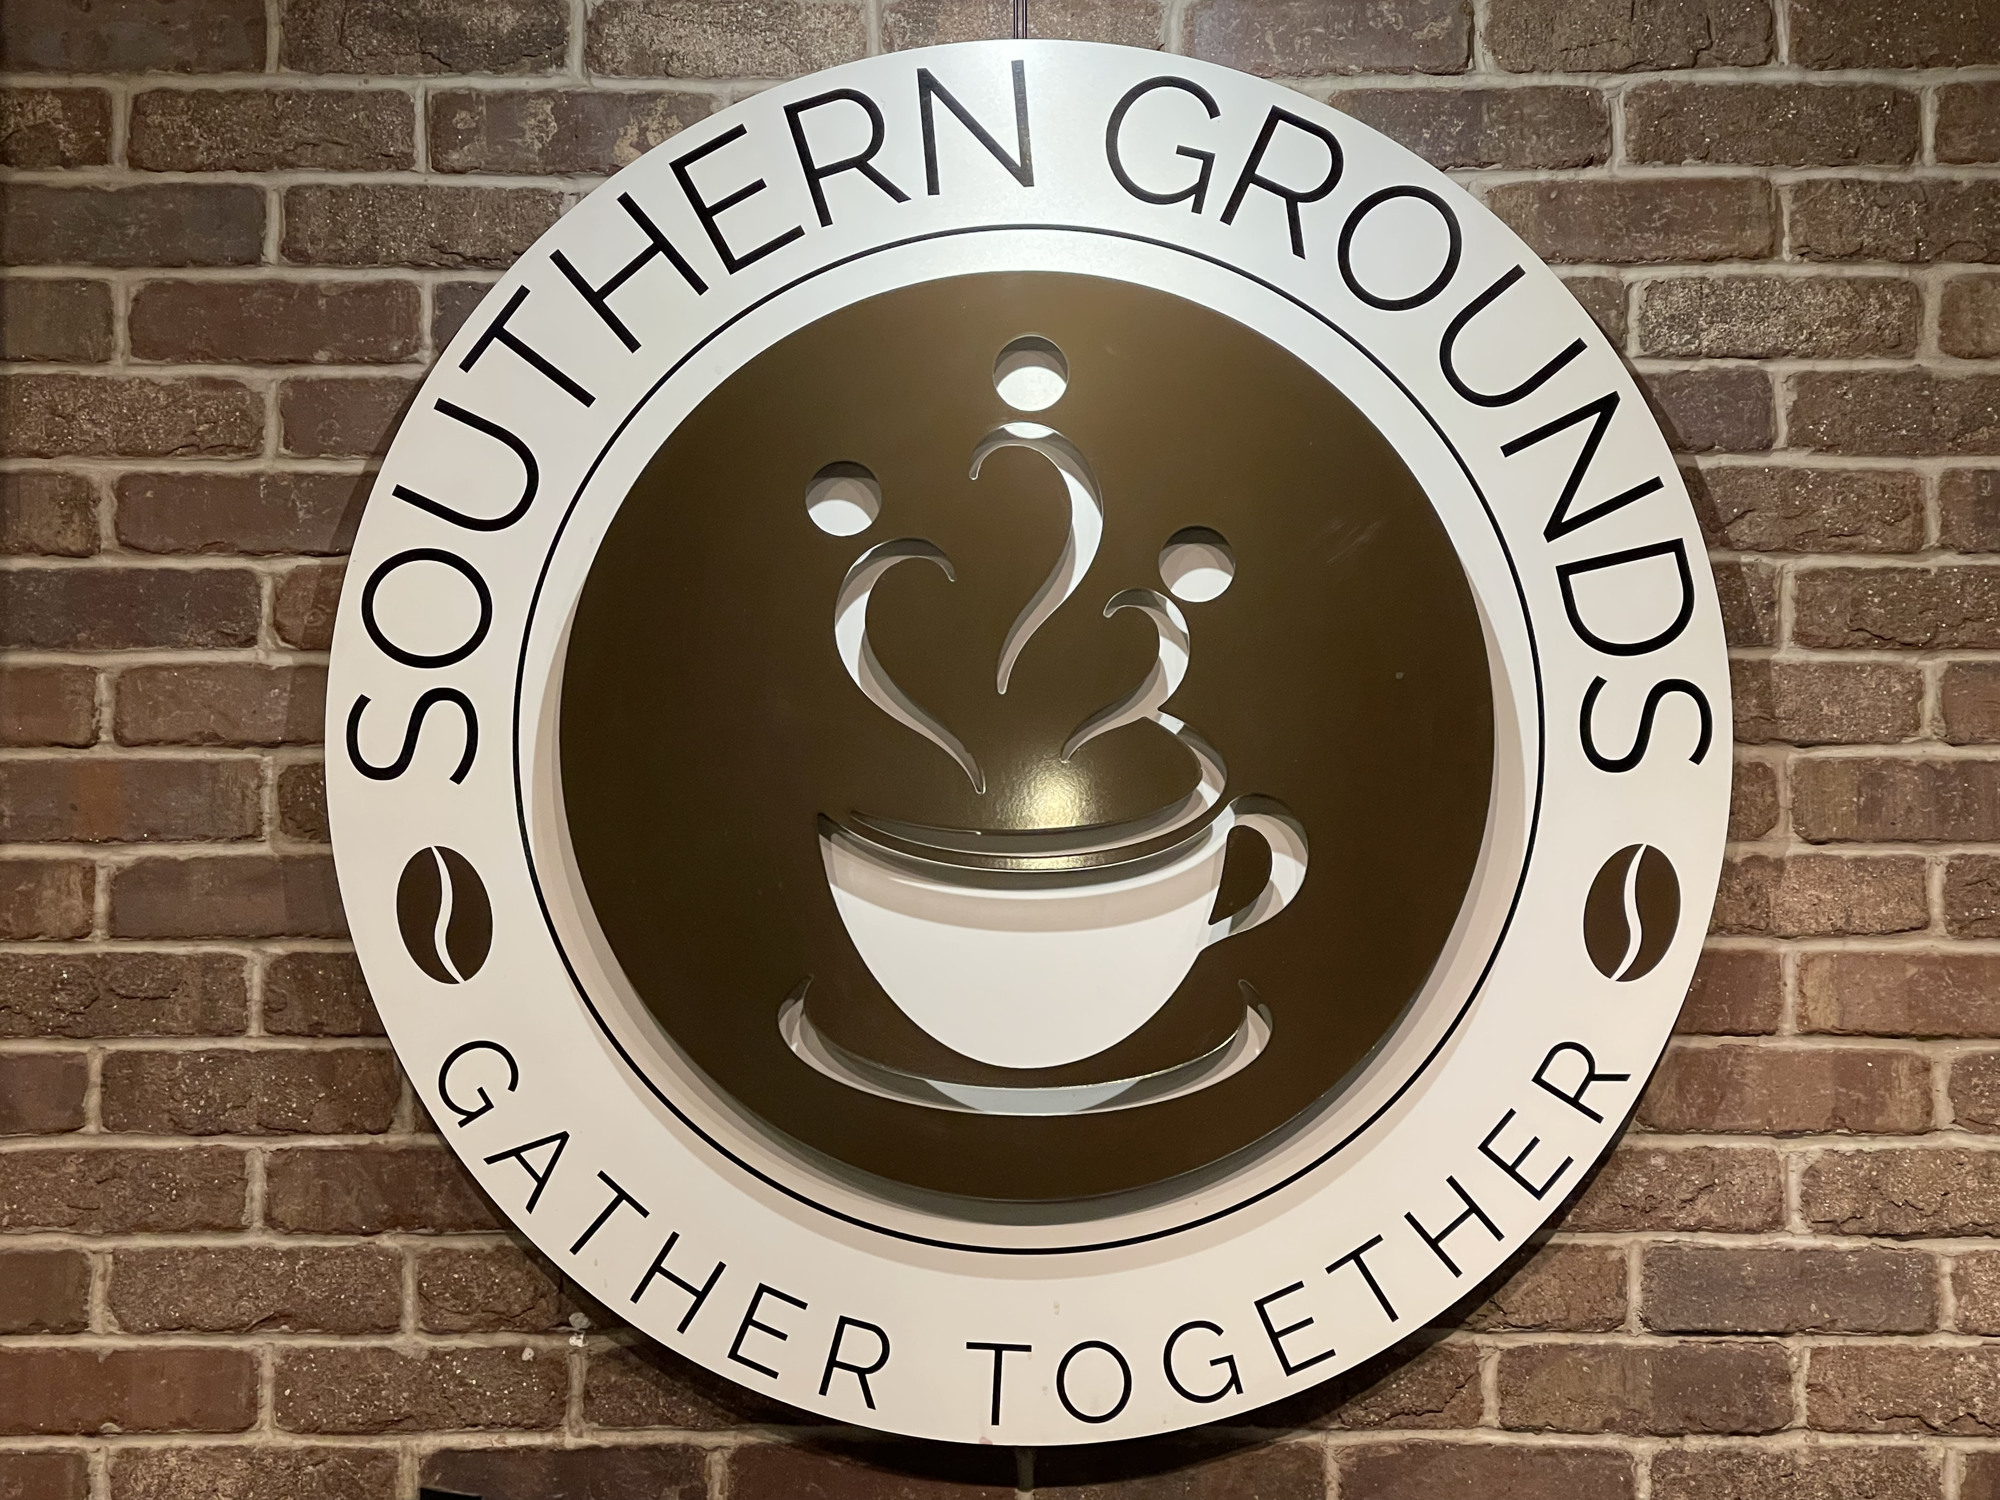 The Southern Grounds logo at the coffee shop in Neptune Beach.